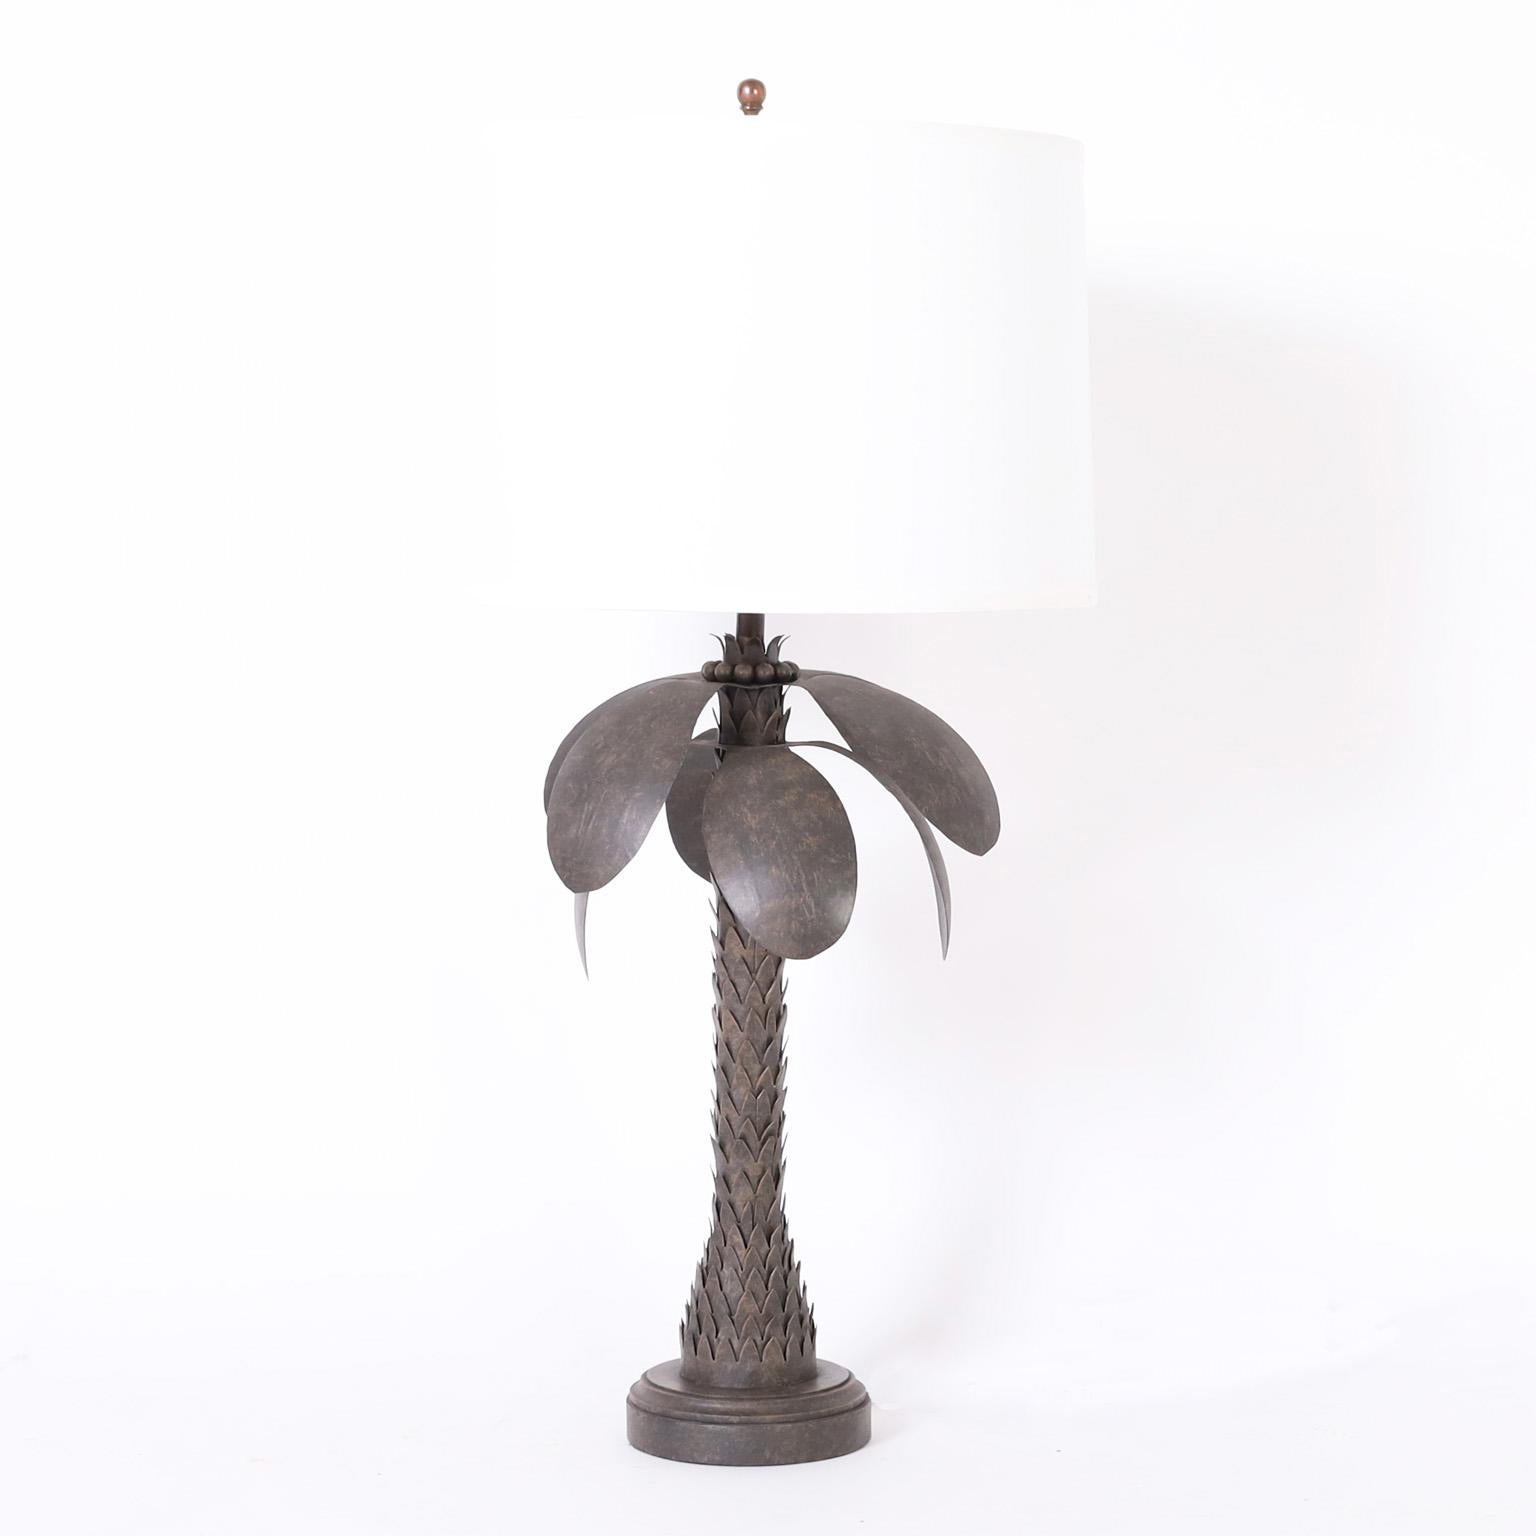 Standout pair of vintage palm tree table lamps crafted in metal with a chic raw metal finish having an unusual set of influences including stylization, industrial, brutalist, and tropical.